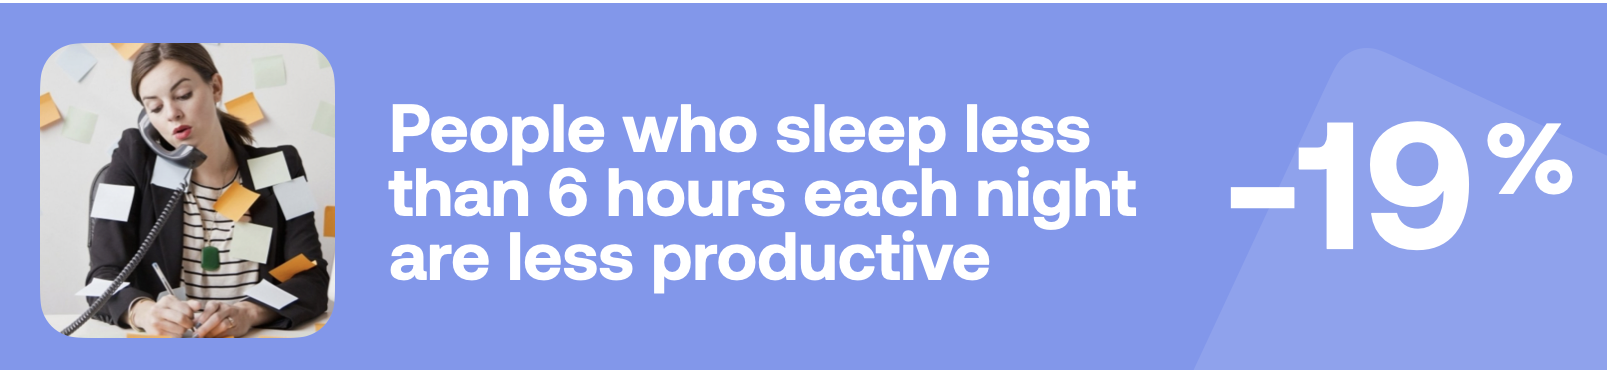 People who sleep less than 6 hours each night are less productive -19%